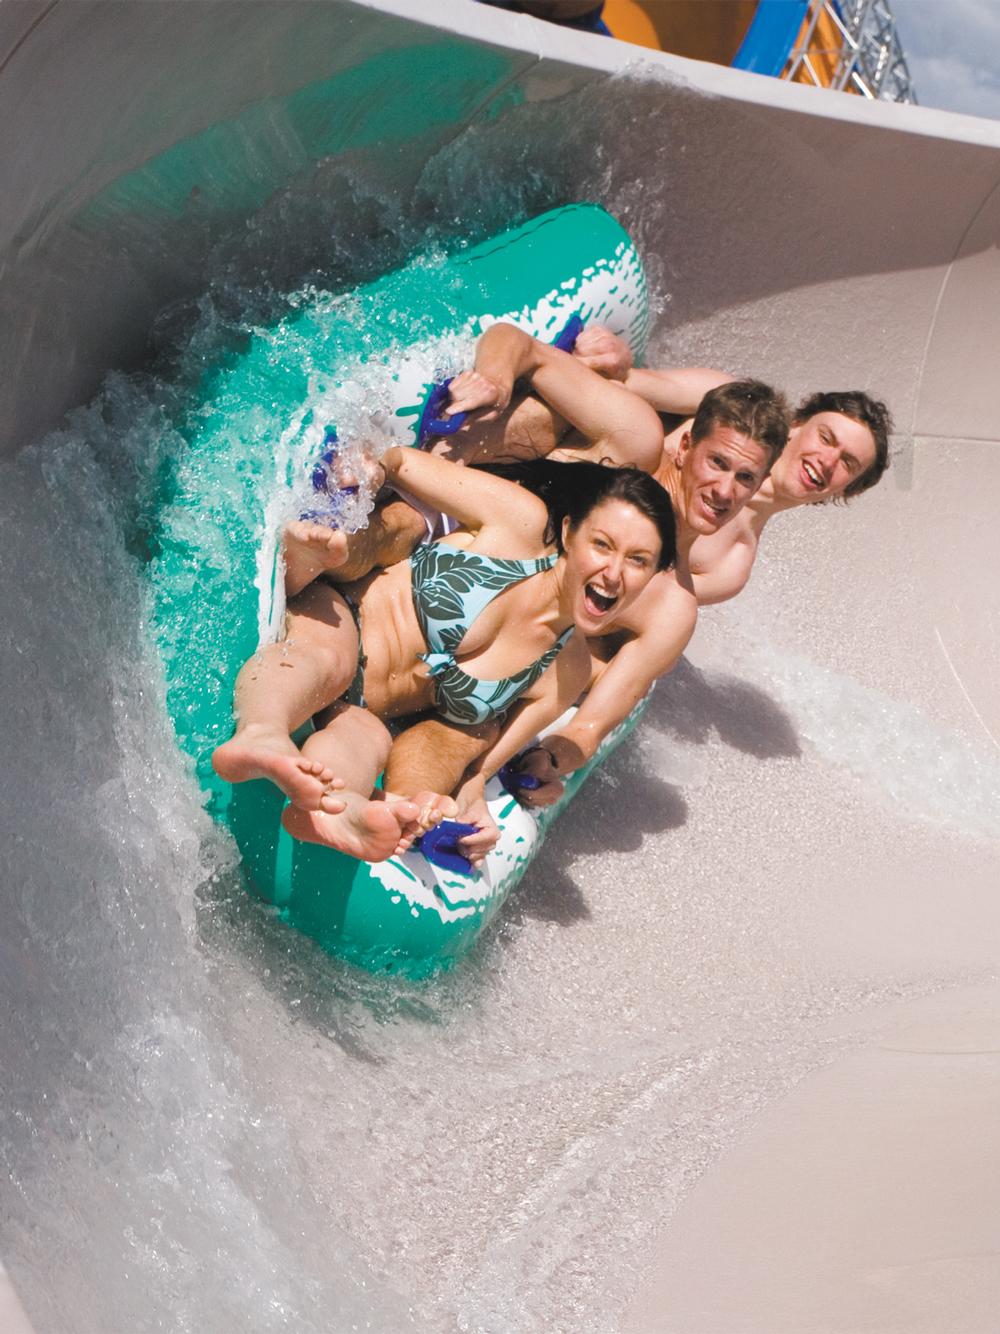 Yas Waterworld is a prime example of an innovative new waterpark